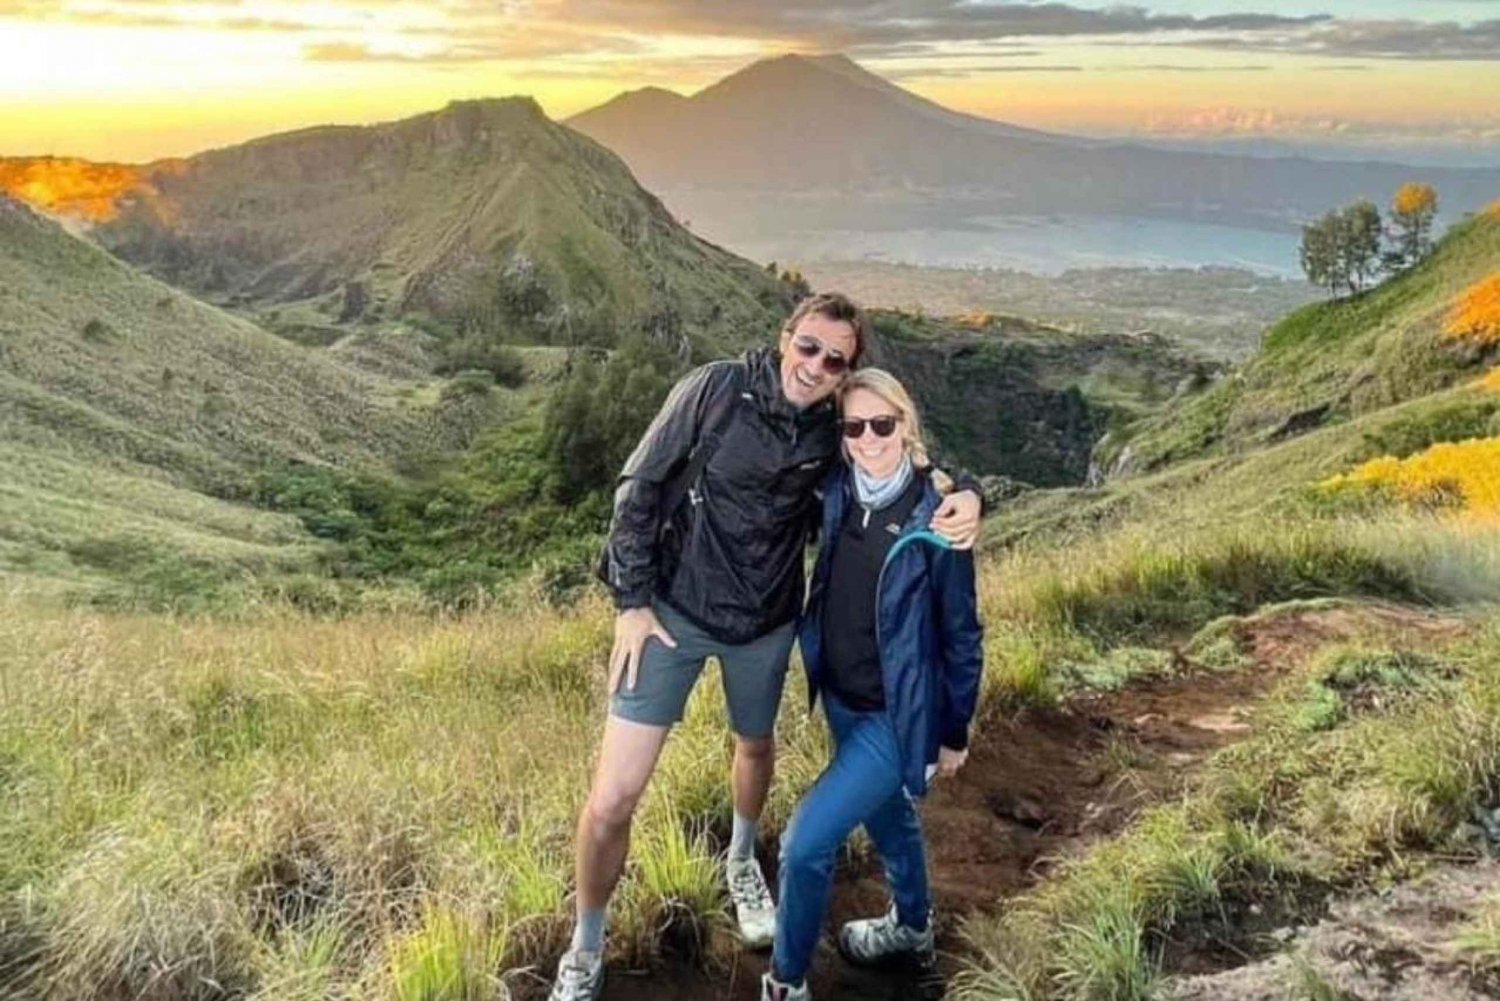 Bali: All Inclusive Mount Batur Sunrise Hike with Hot Spring